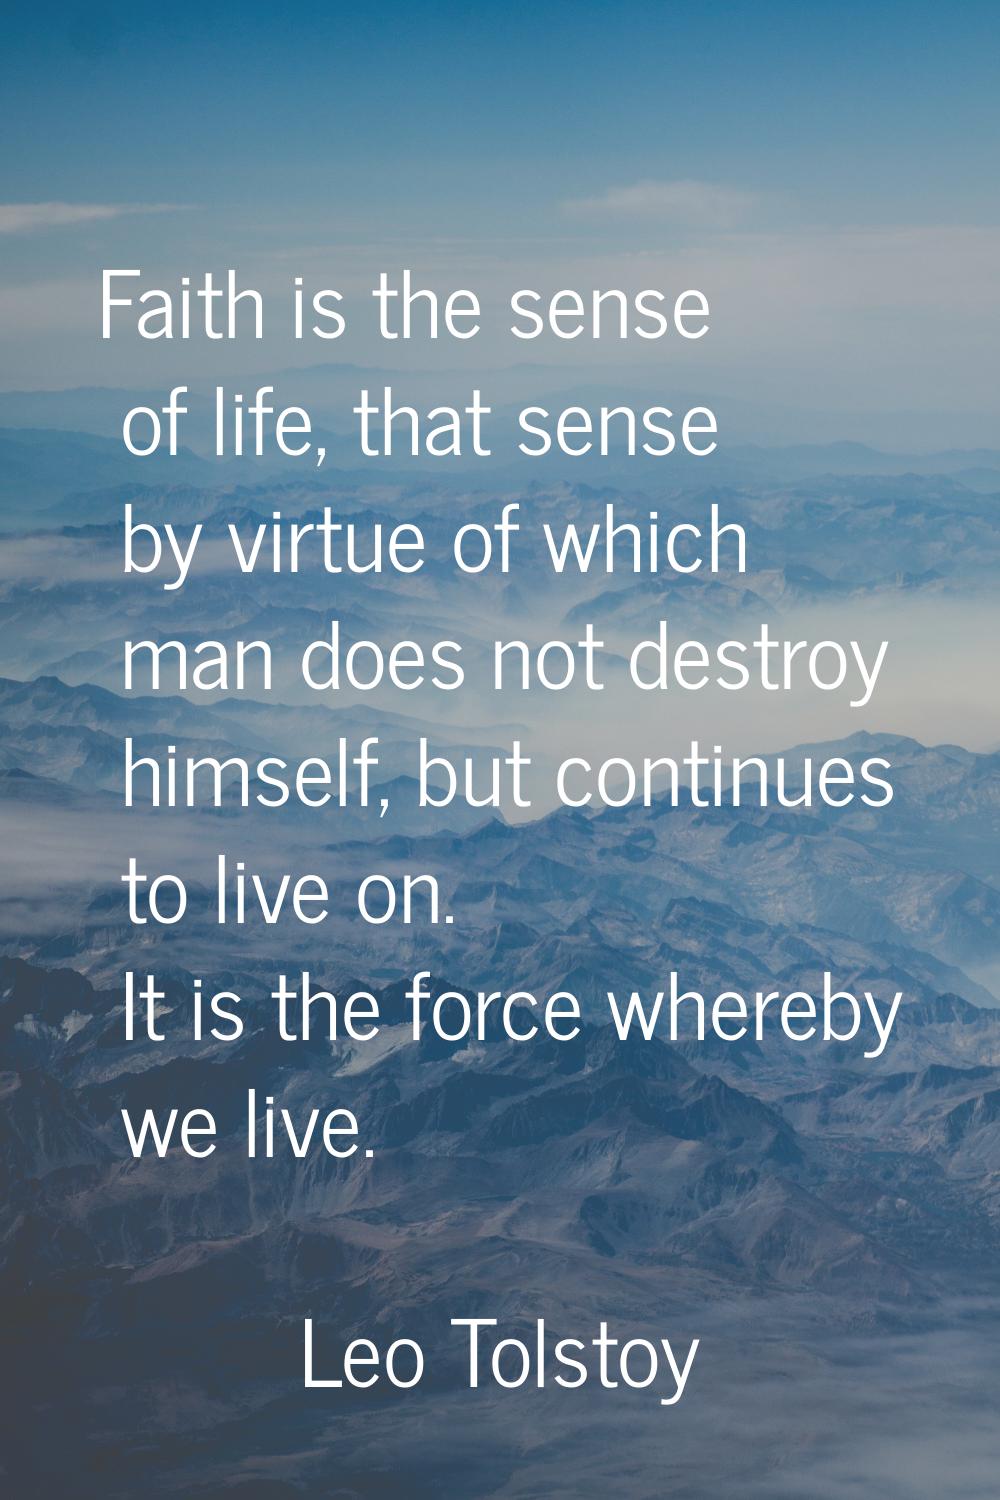 Faith is the sense of life, that sense by virtue of which man does not destroy himself, but continu